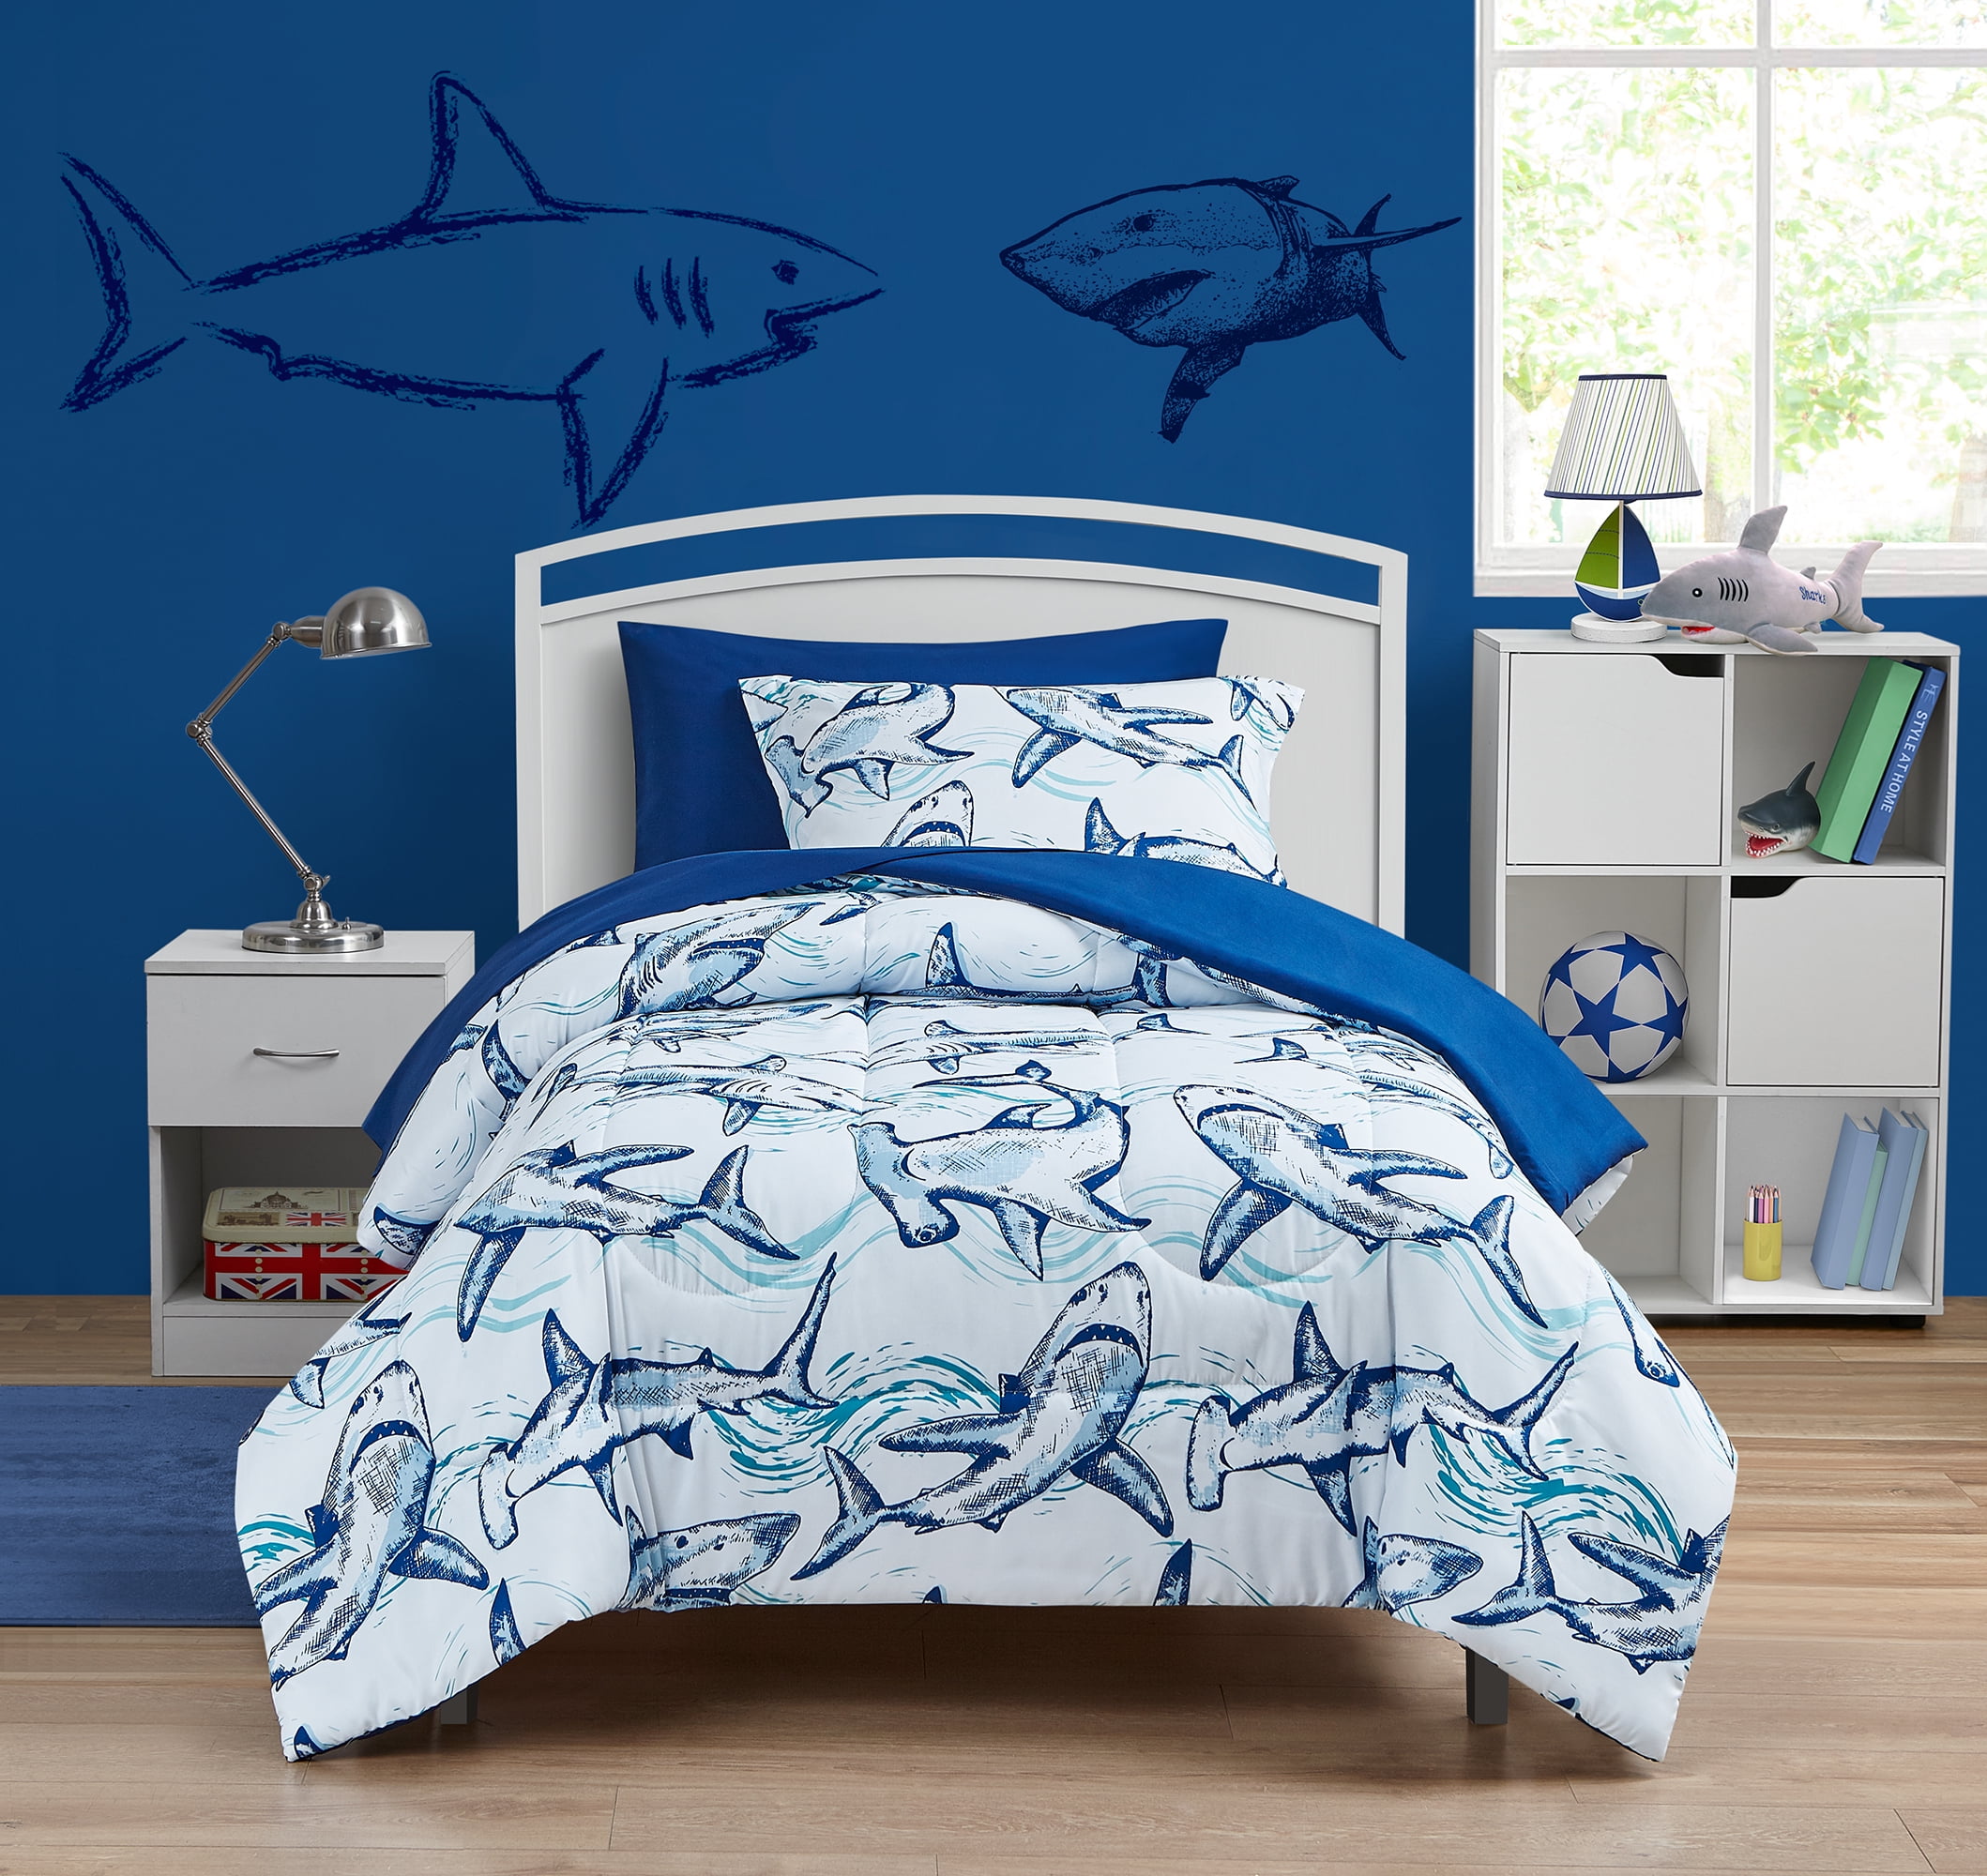 Mainstays Kids Sea Shark Bed-in-a-Bag 